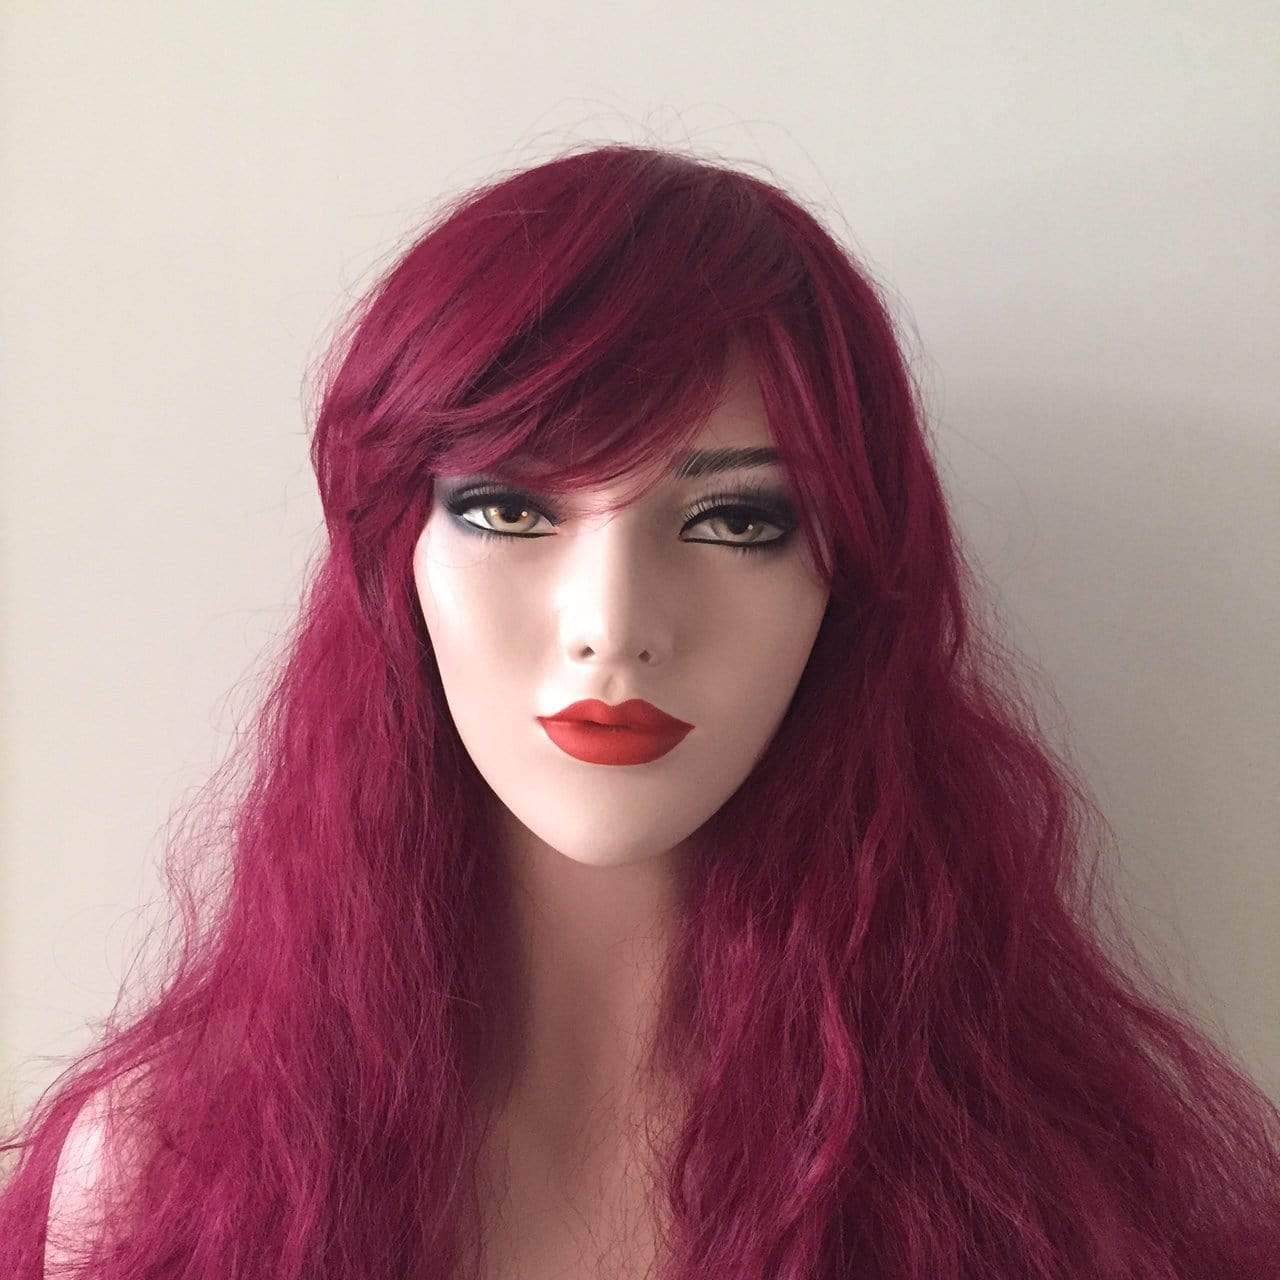 nevermindyrhead Women Red Long Curly Frizzy Fringe Bangs Wig